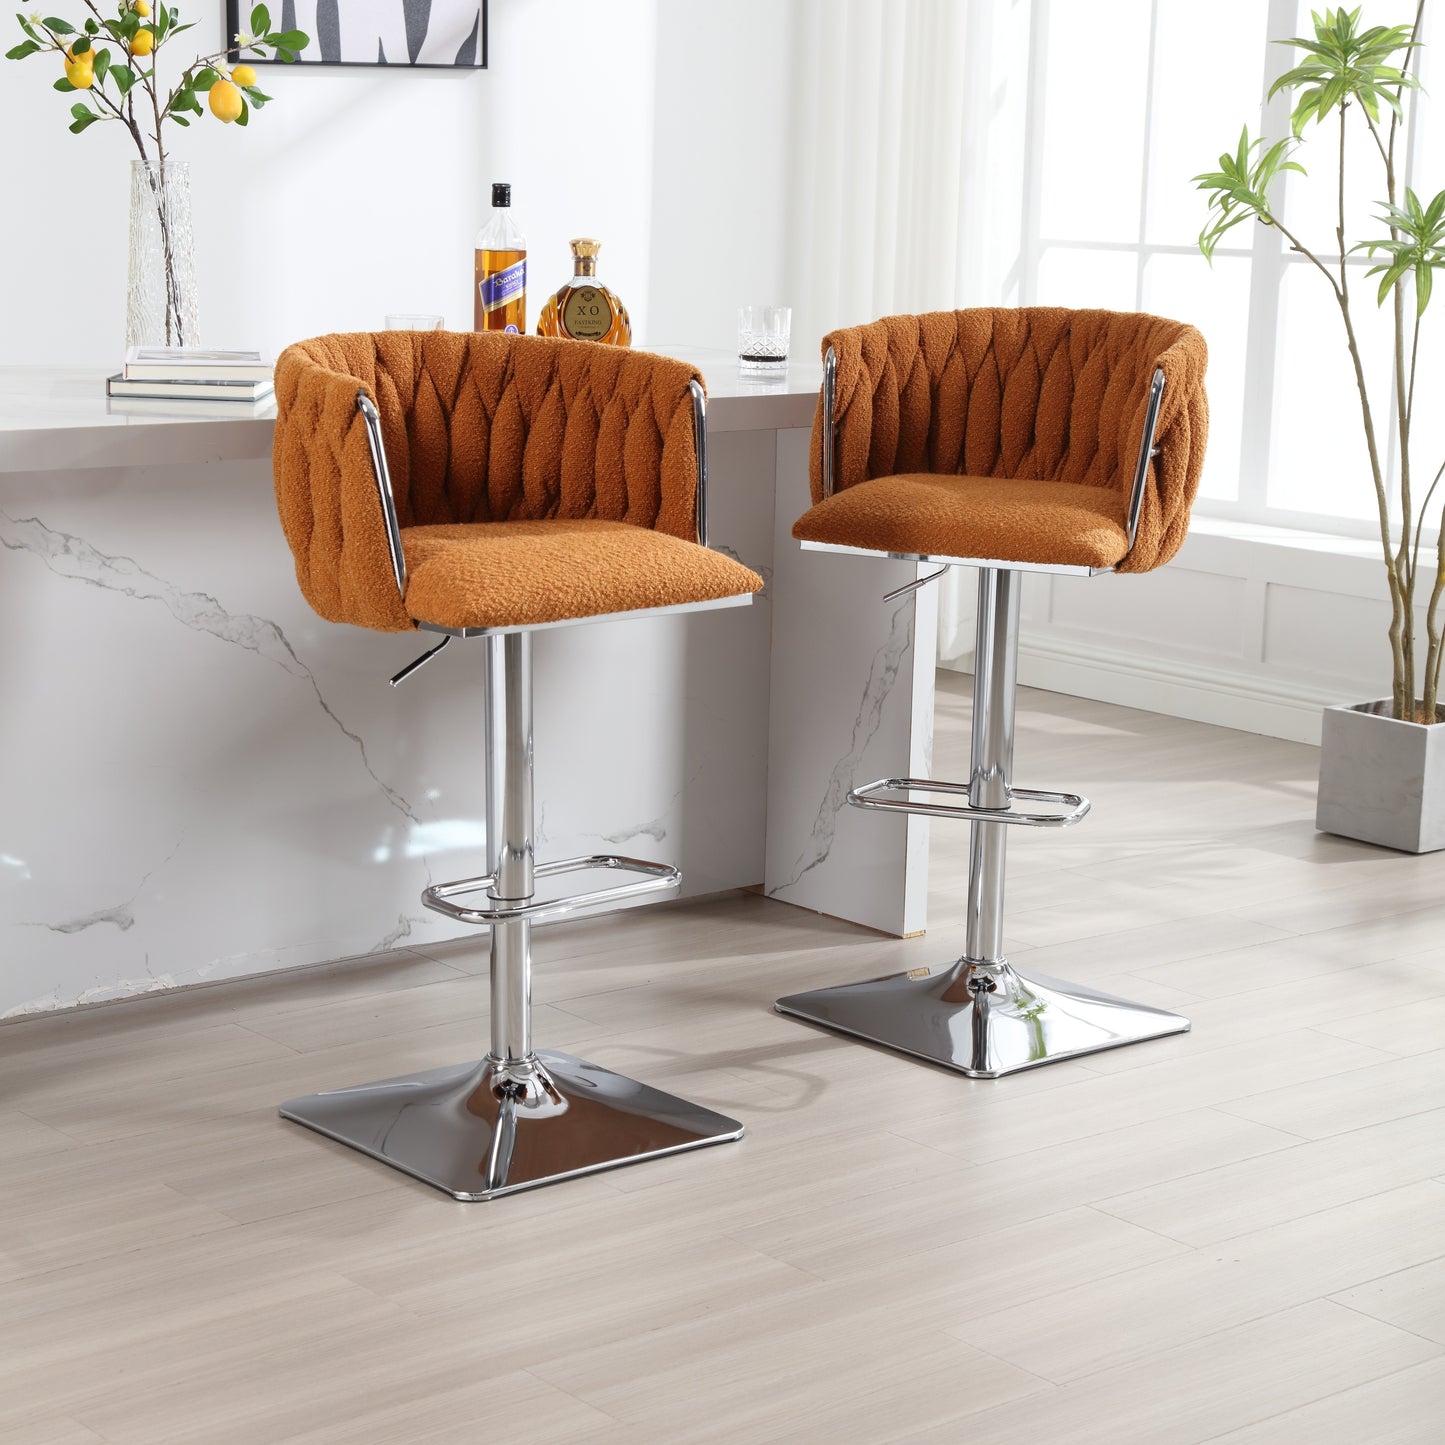 COOLMORE Vintage Bar Stools with Back and Footrest Counter Height Dining Chairs 2PC/SET - Enova Luxe Home Store